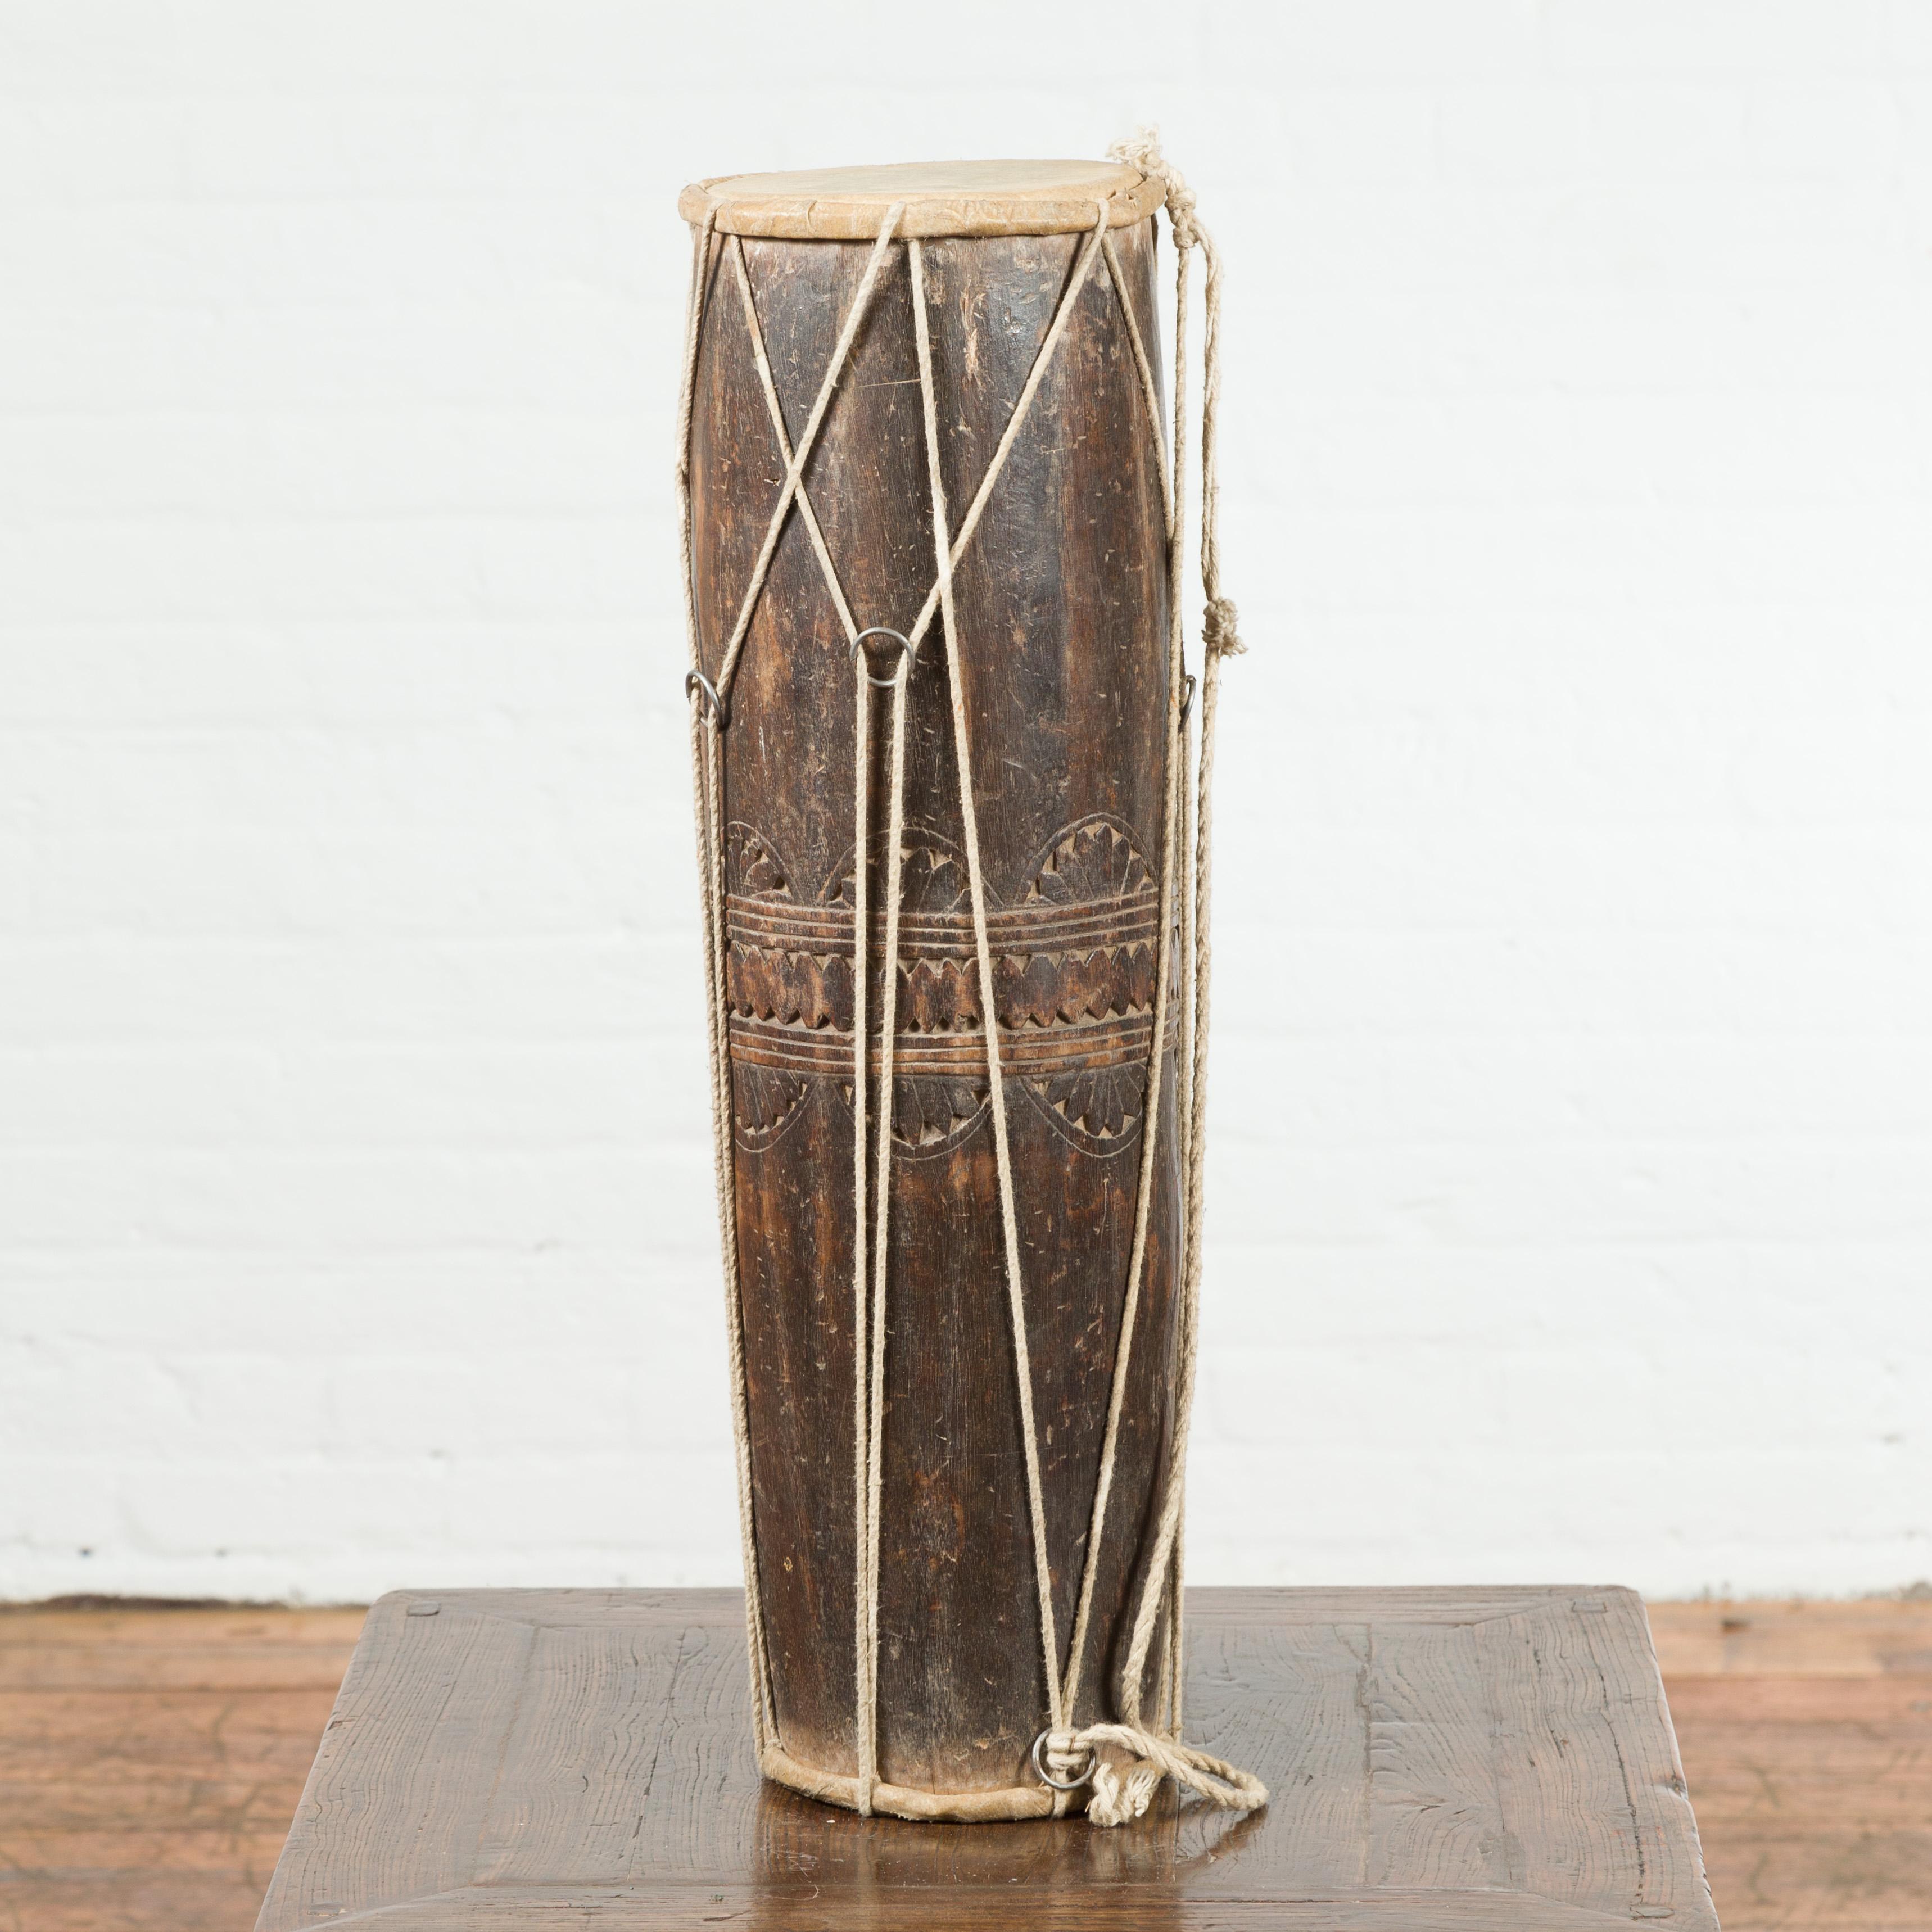 An antique Thai ceremonial wooden drum from the 19th century, with leather drumhead. Sculptural and freestanding, this 19th century drum, created in Thailand, will make for a great decorative accentuation in any home. Topped with a leather drumhead